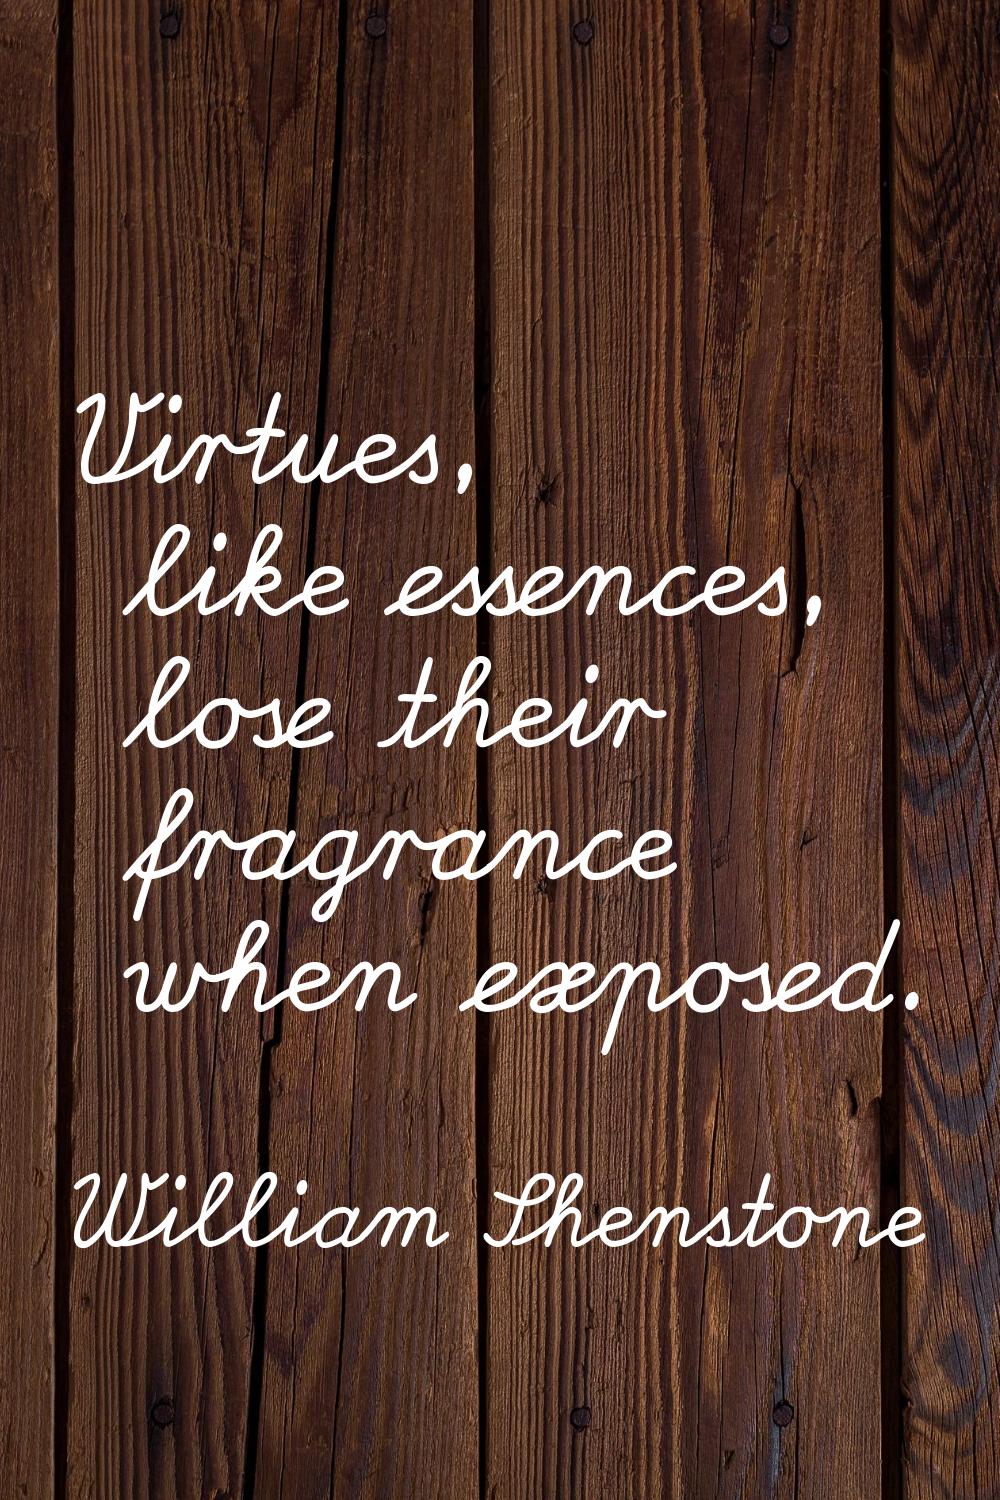 Virtues, like essences, lose their fragrance when exposed.